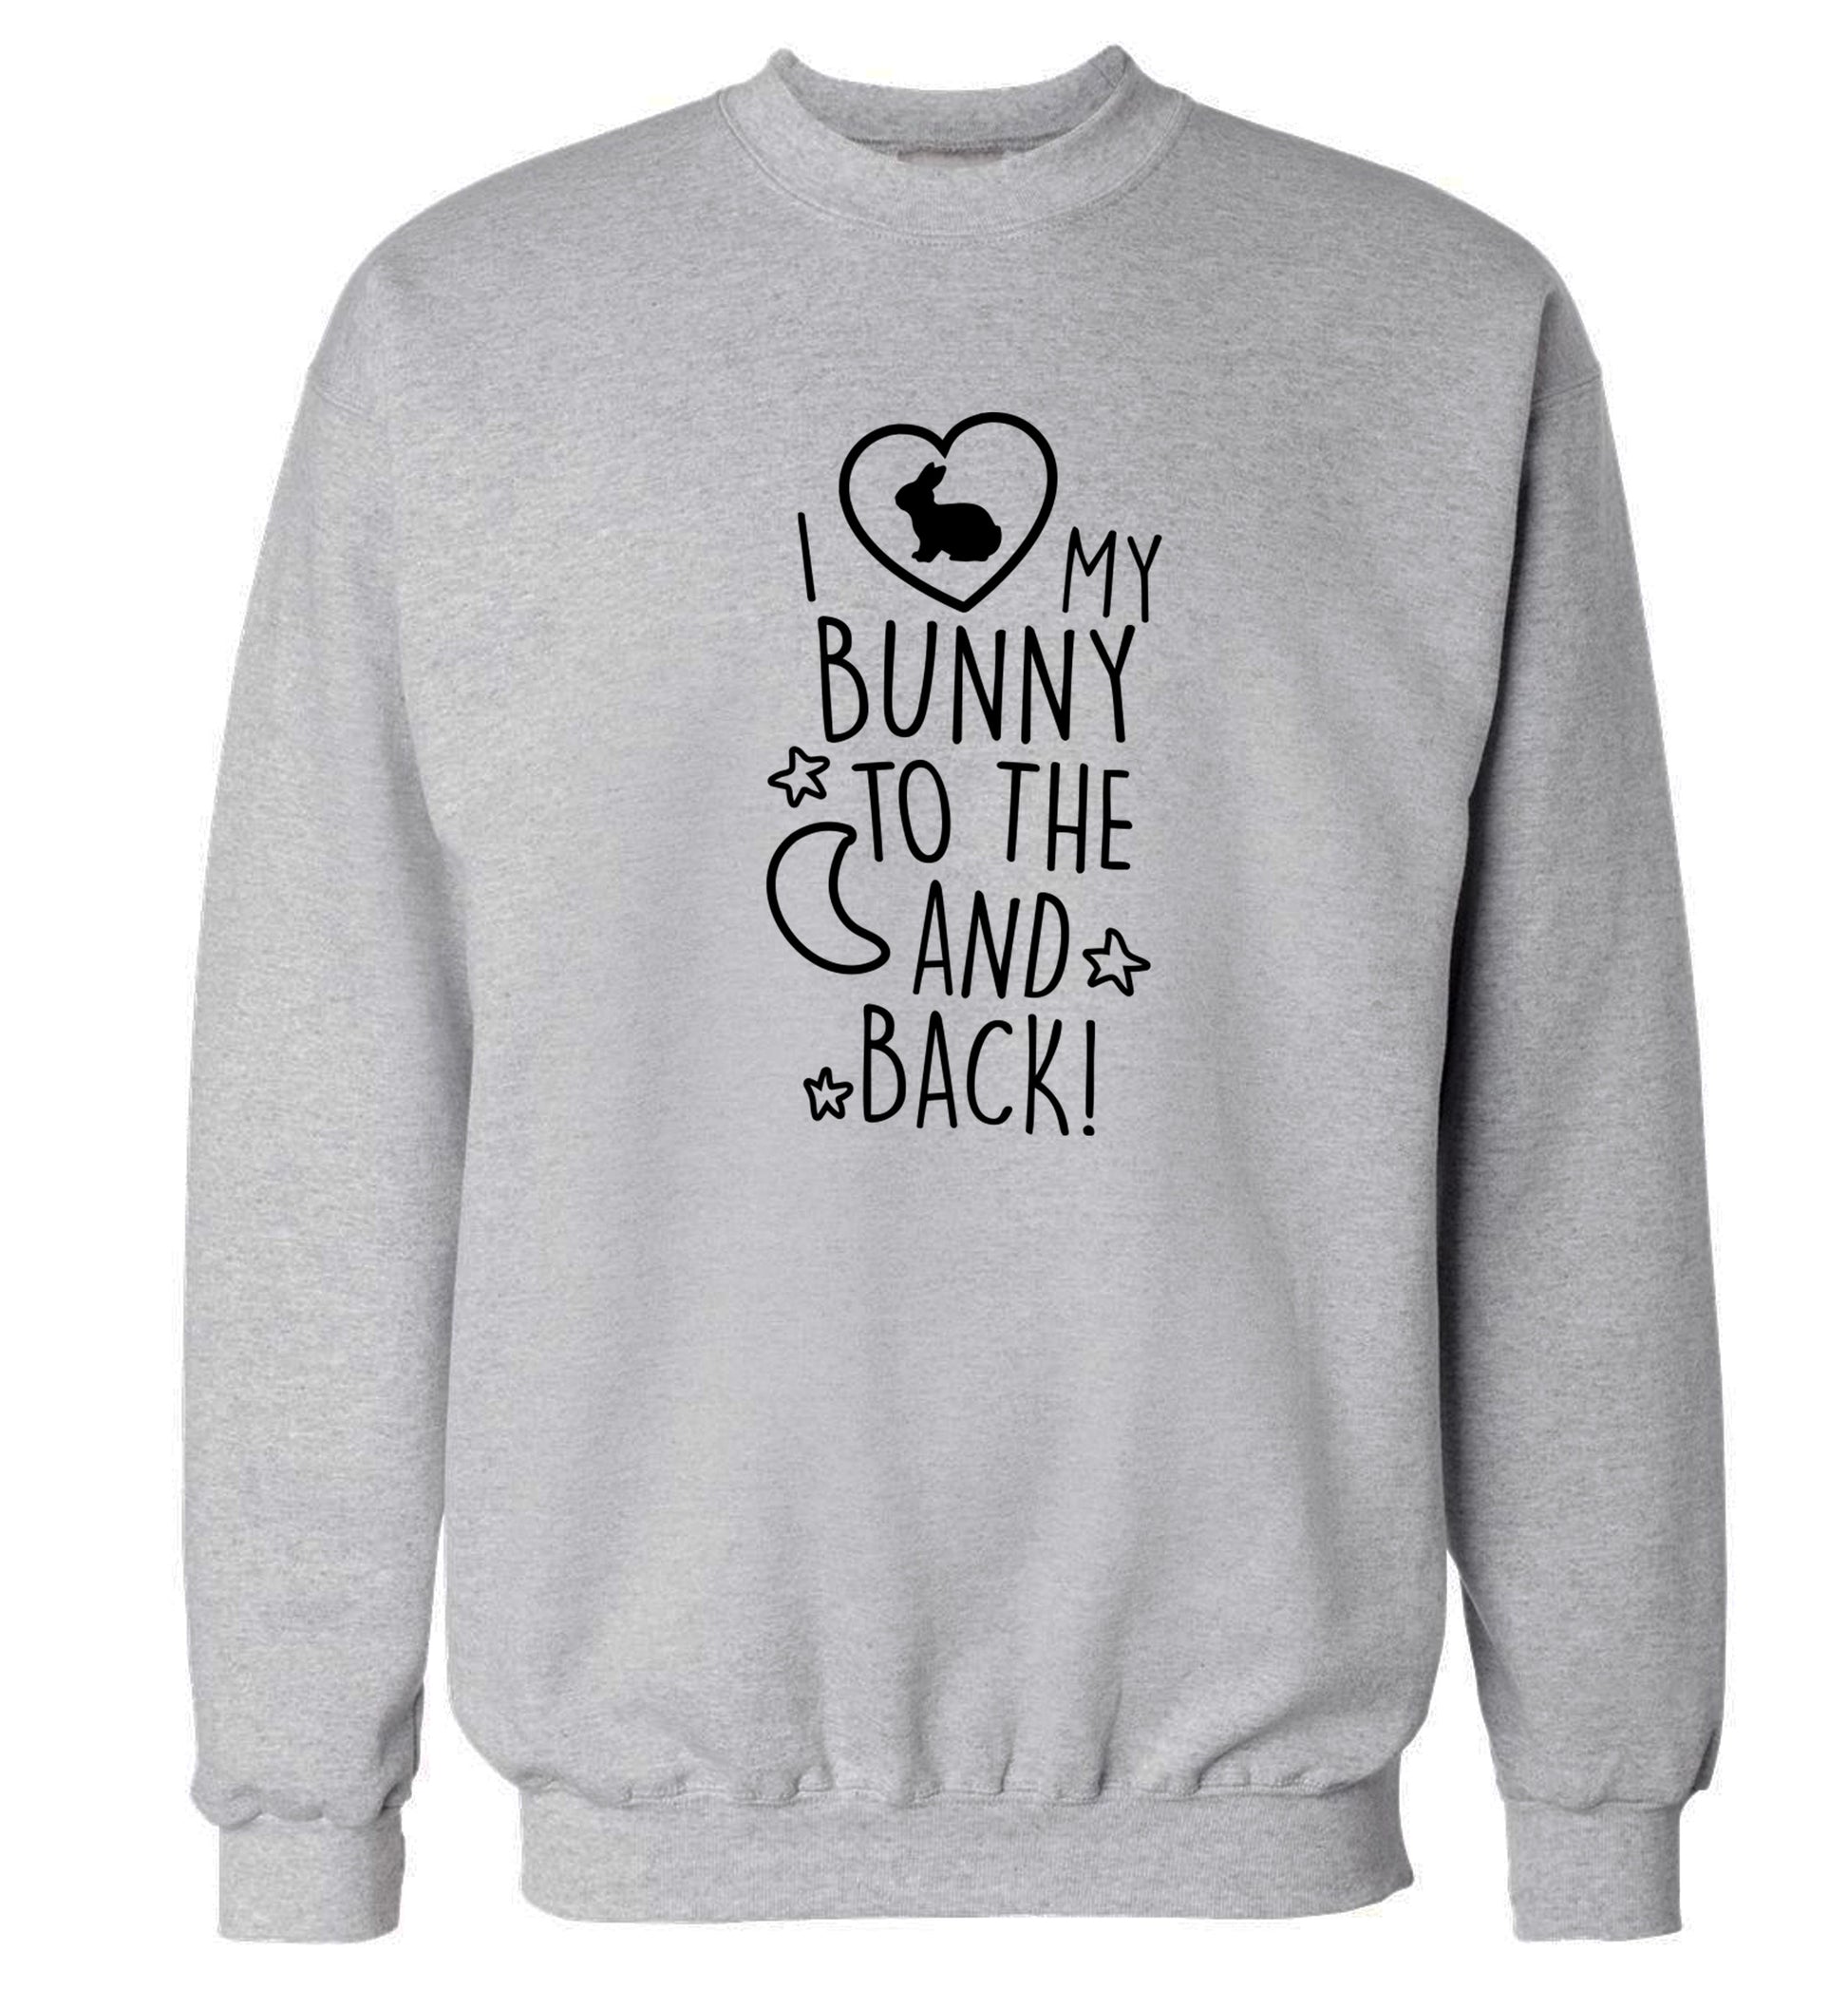 I love my bunny to the moon and back Adult's unisex grey  sweater 2XL